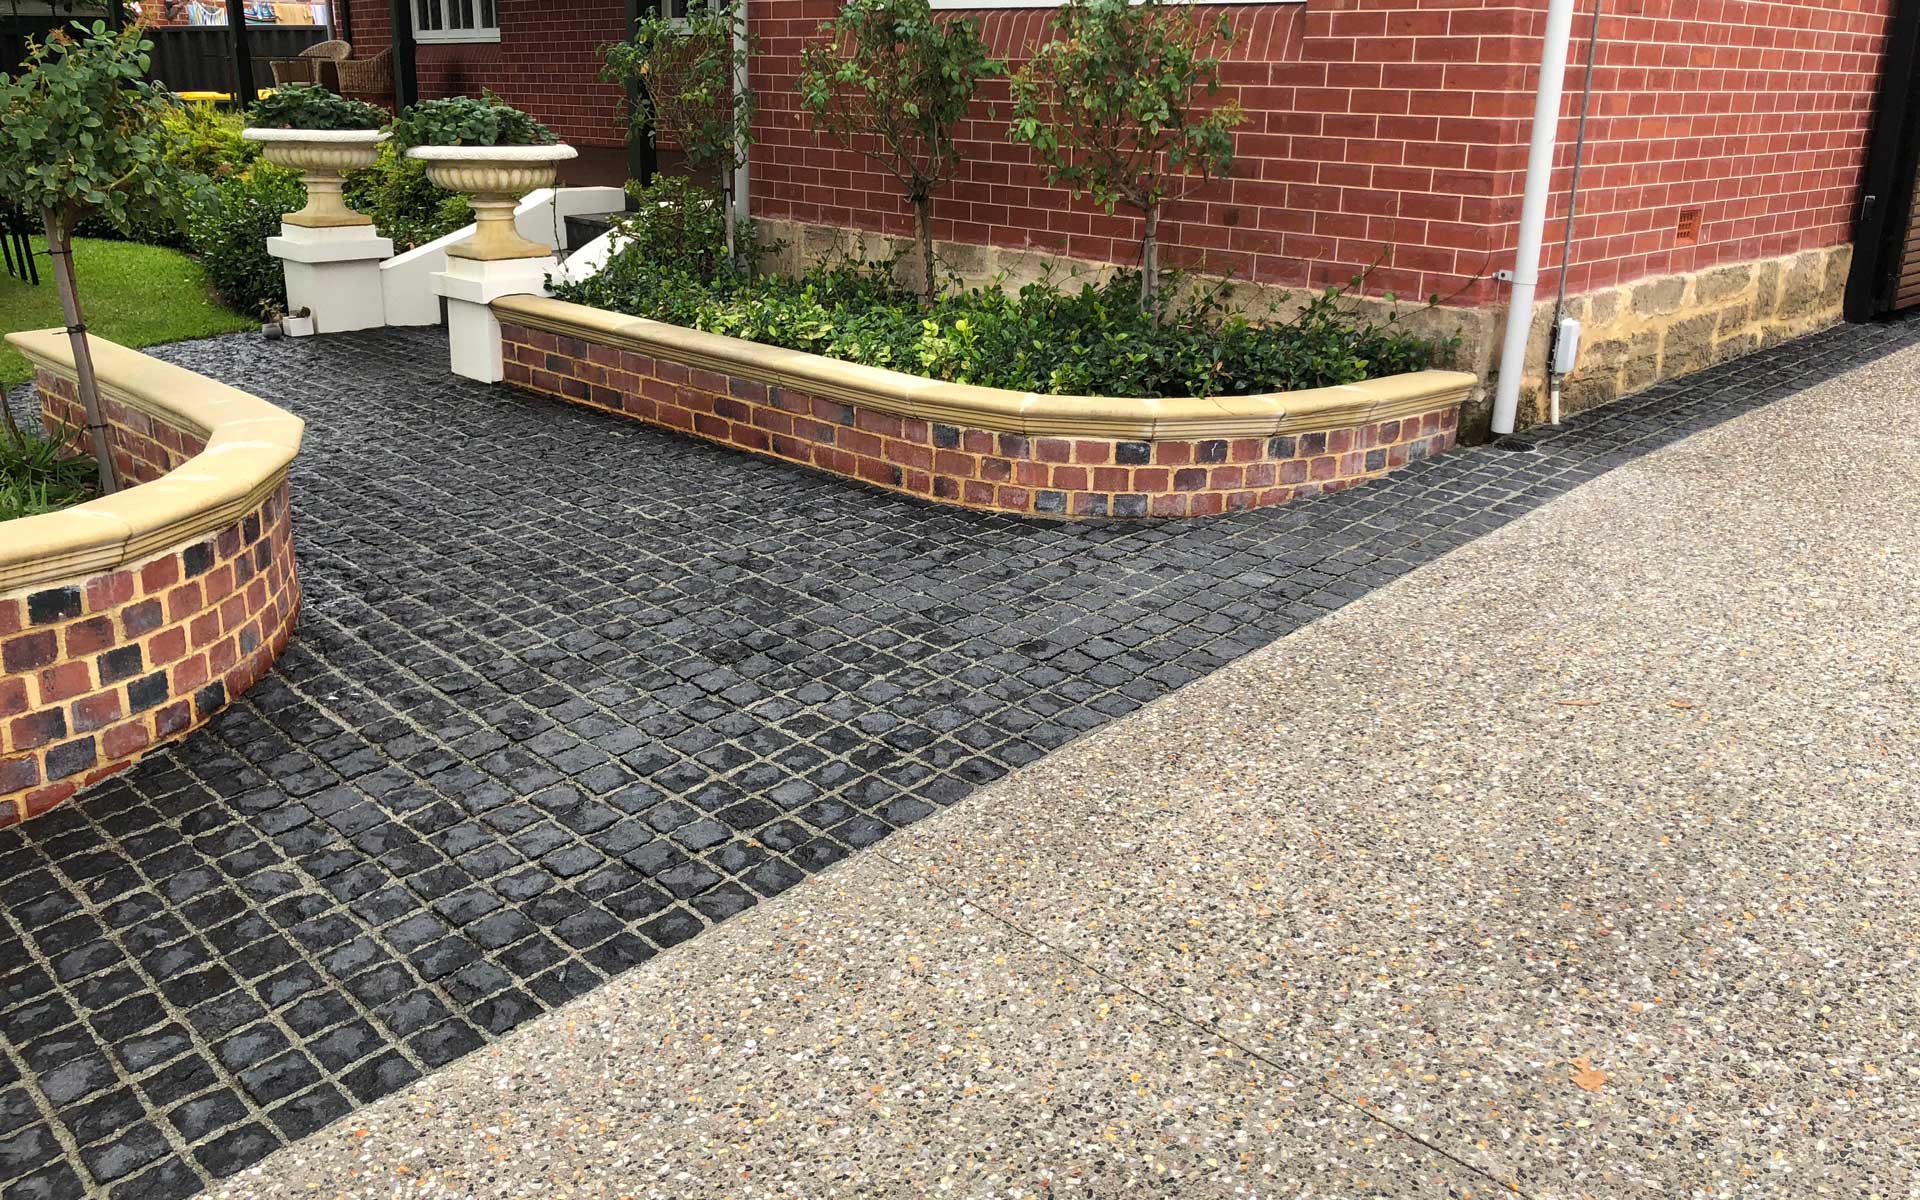 Exposed Aggregate Driveway & Cobblestone Entry Path - Fremantle